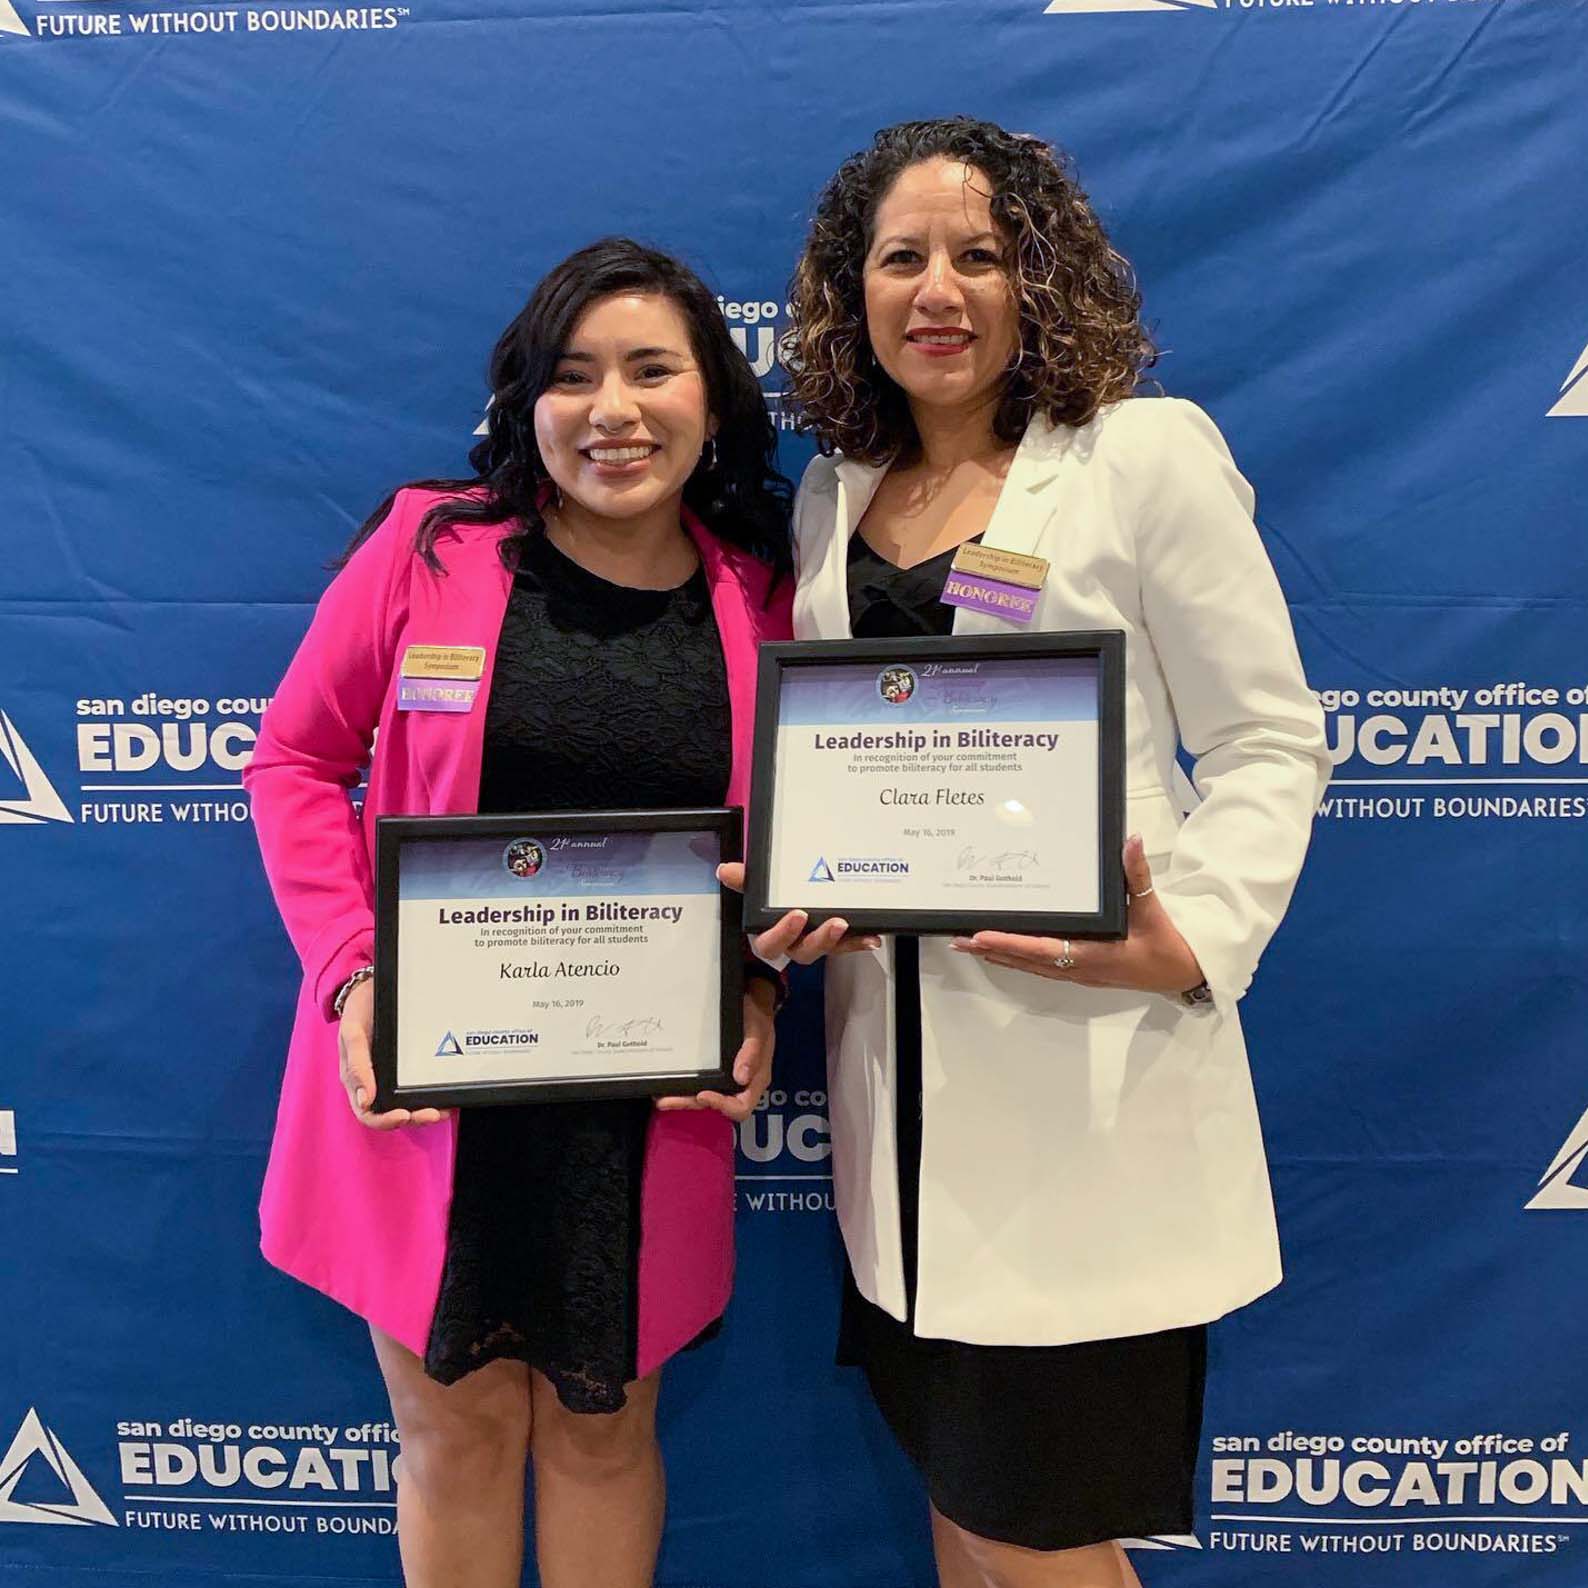 Founding Teachers Ms Atencio & Ms Fletes receiving the Leadership in Biliteracy Award from the San Diego County Office of Education.